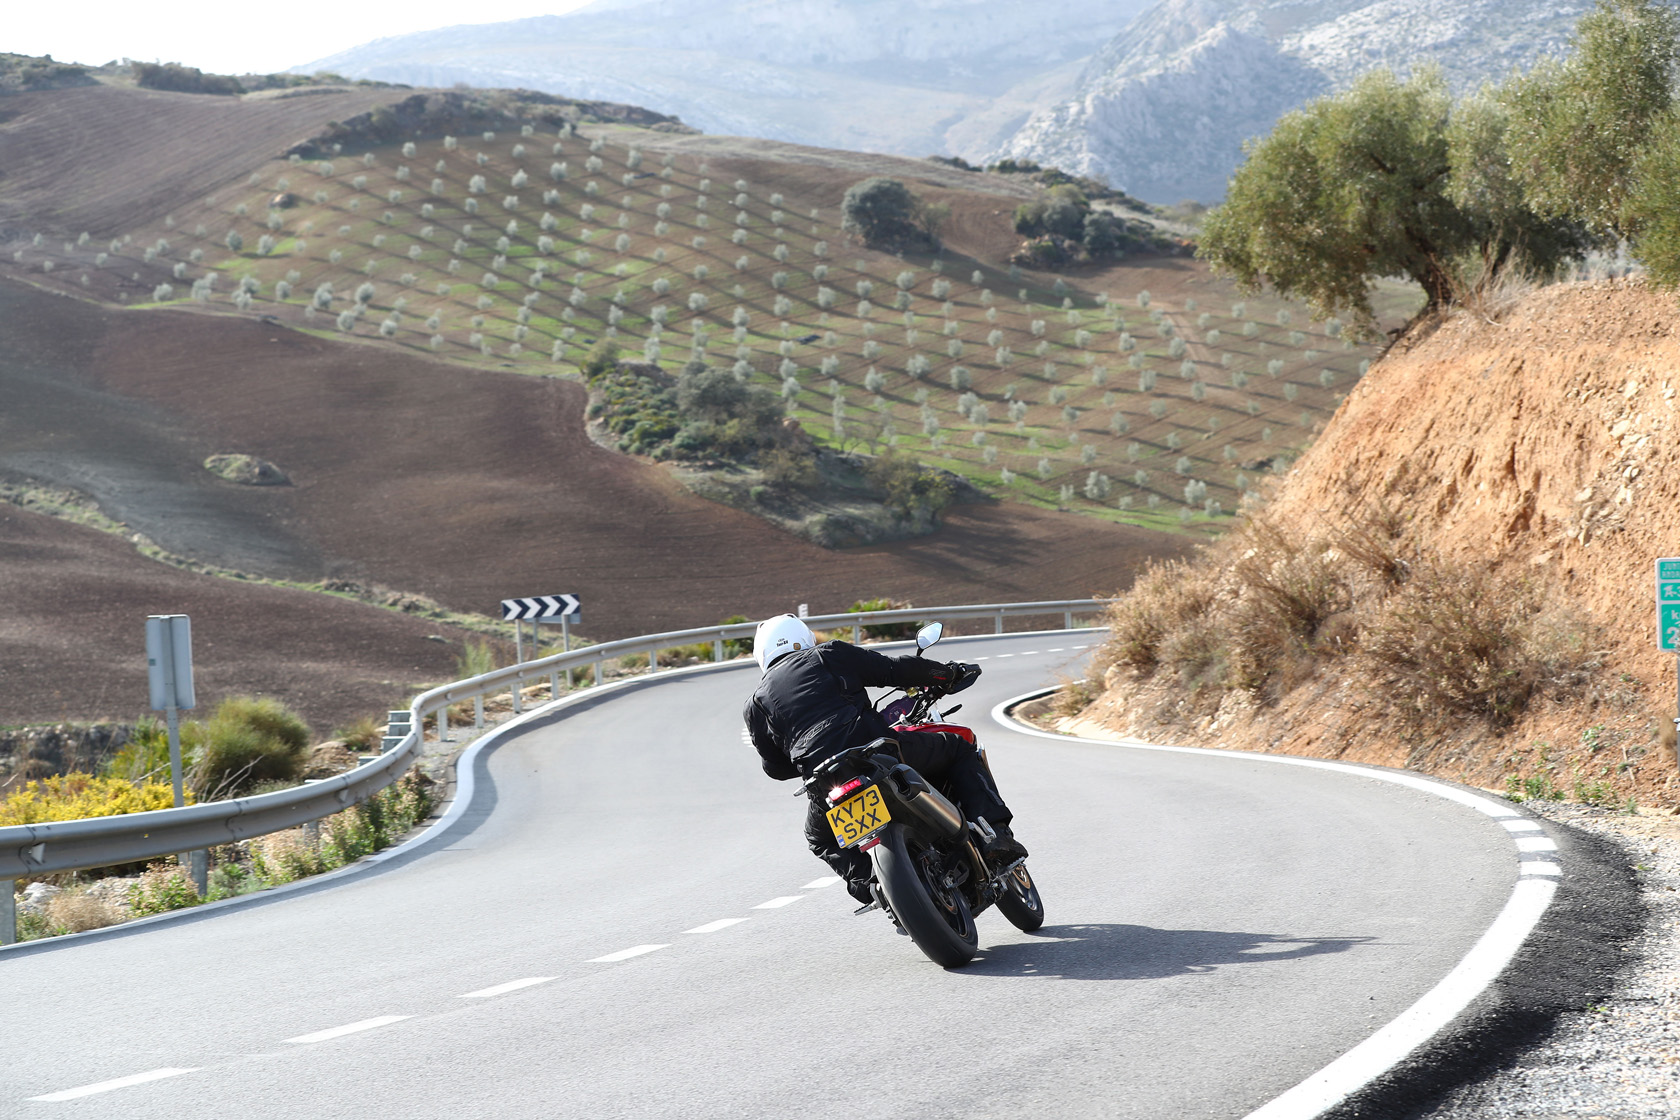 Riding the Triumph Tiger 900 GT Pro in Spain